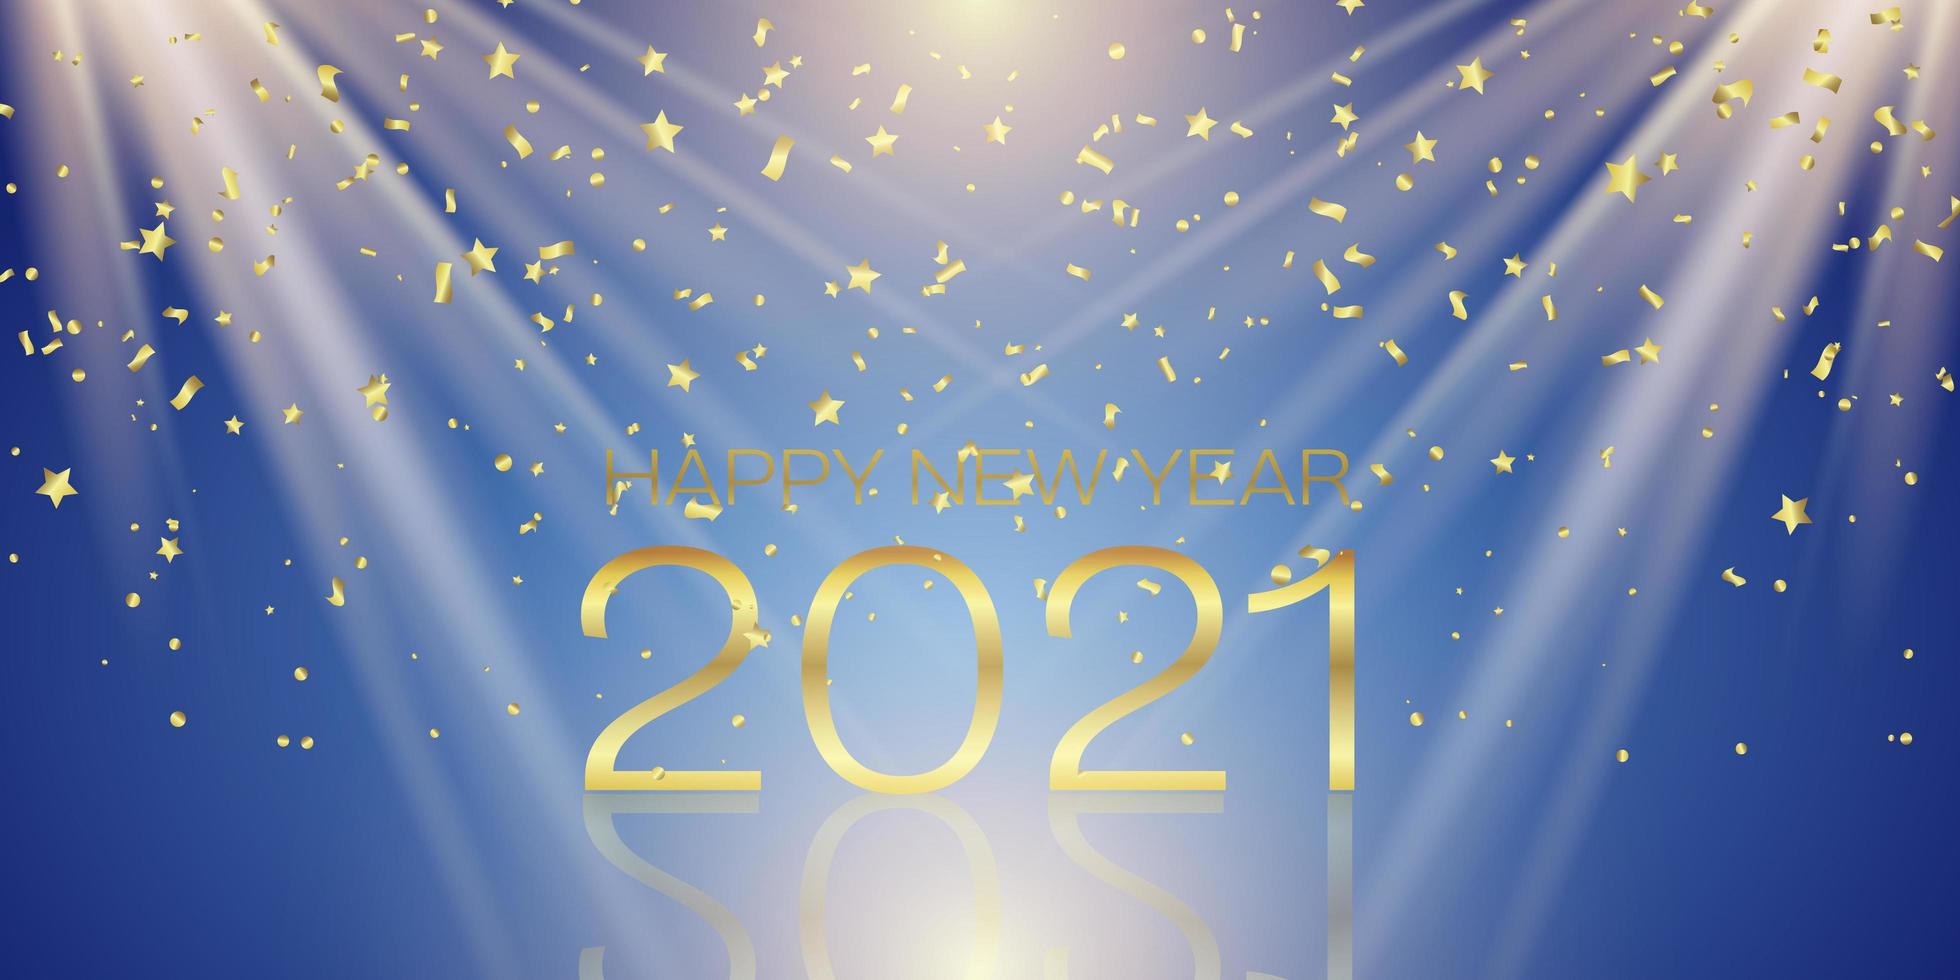 Happy New Year banner with gold confetti design vector